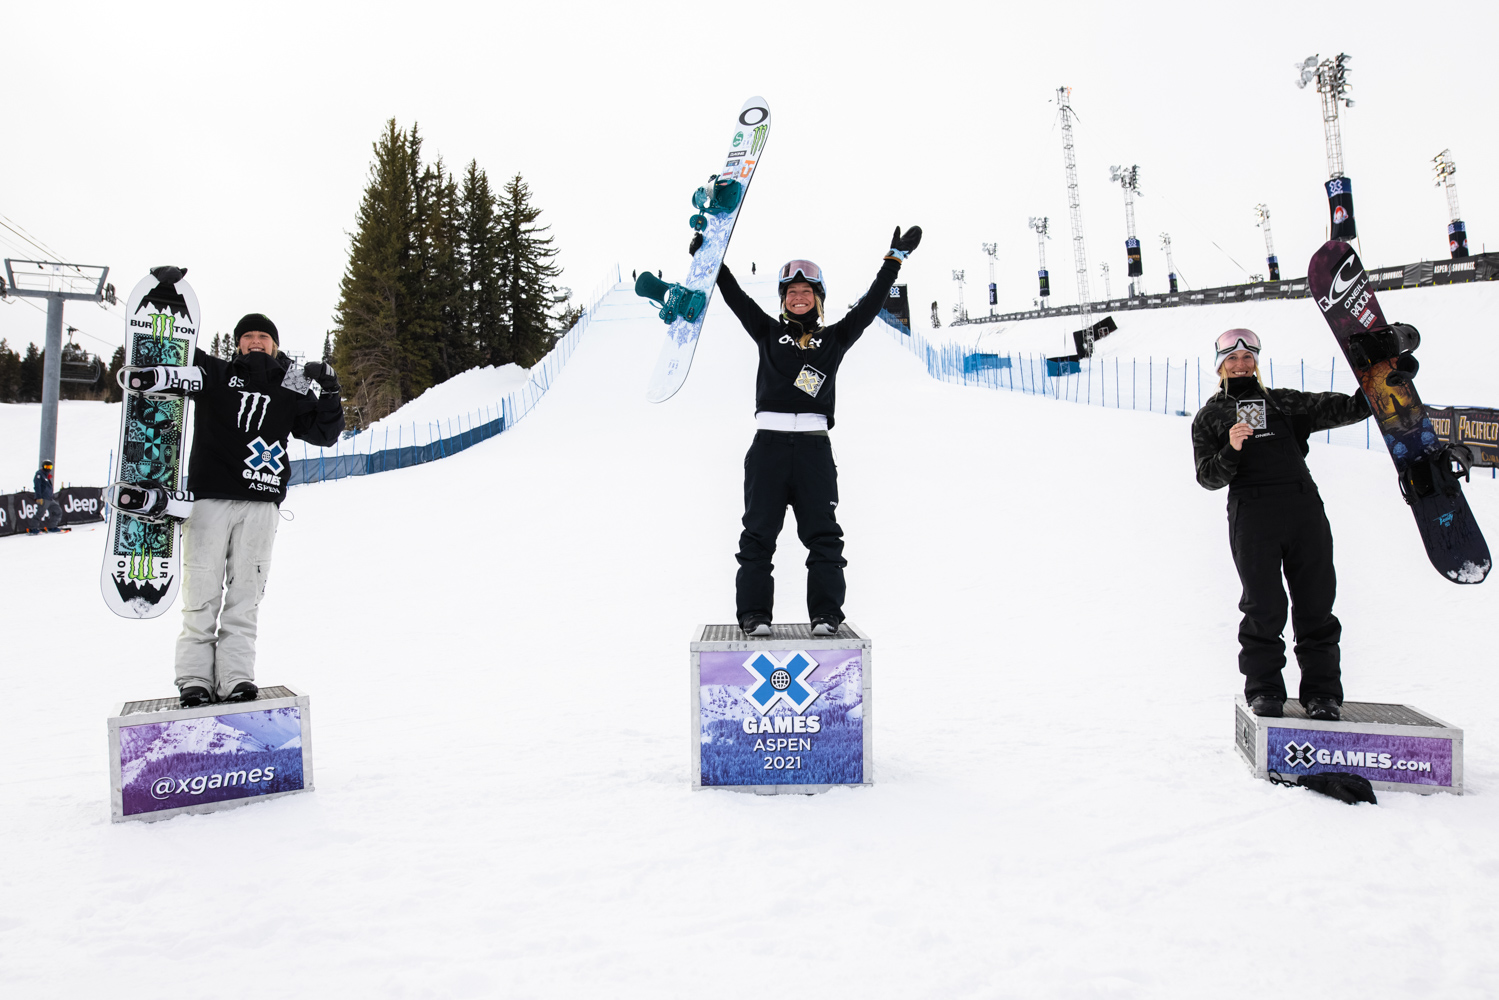 Monster Energy's Jamie Anderson and Zoi Sadowski-Synnott Take Gold and Silver in Women's Snowboard Slopestyle at X Games Aspen 2021